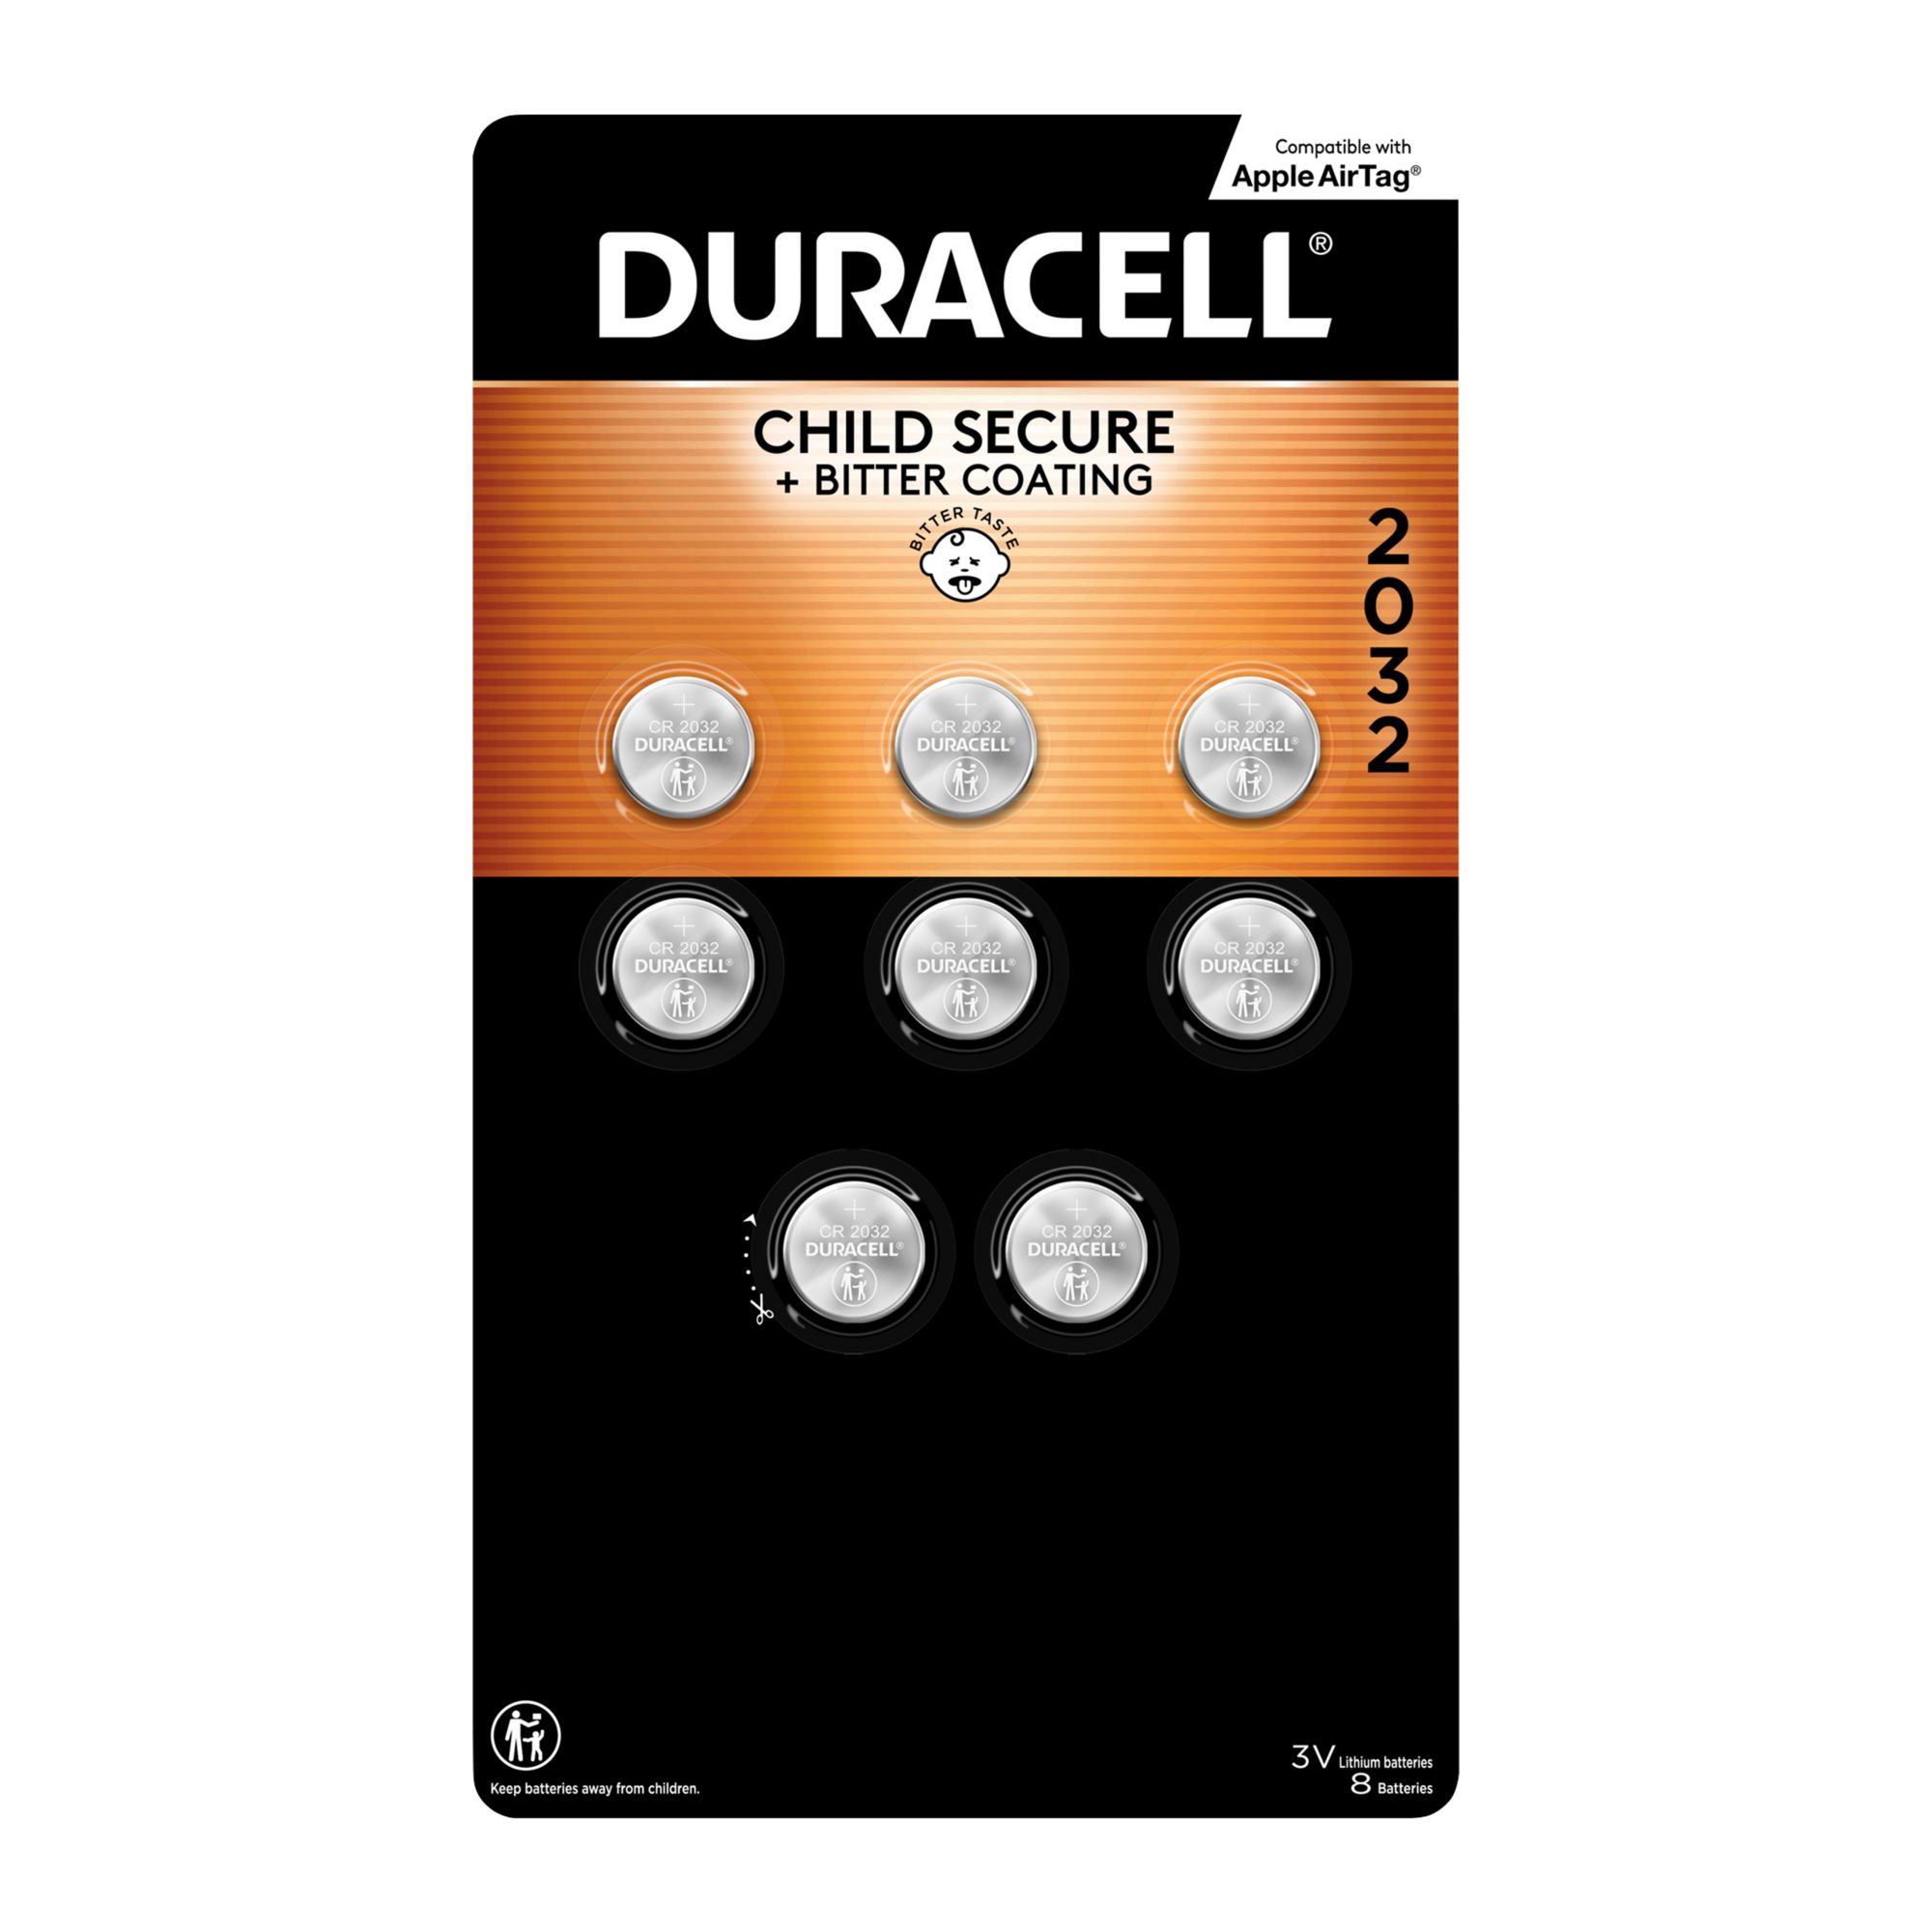 Duracell CR2032 Coin Battery - 10 Pack + FREE SHIPPING - Brooklyn Battery  Works